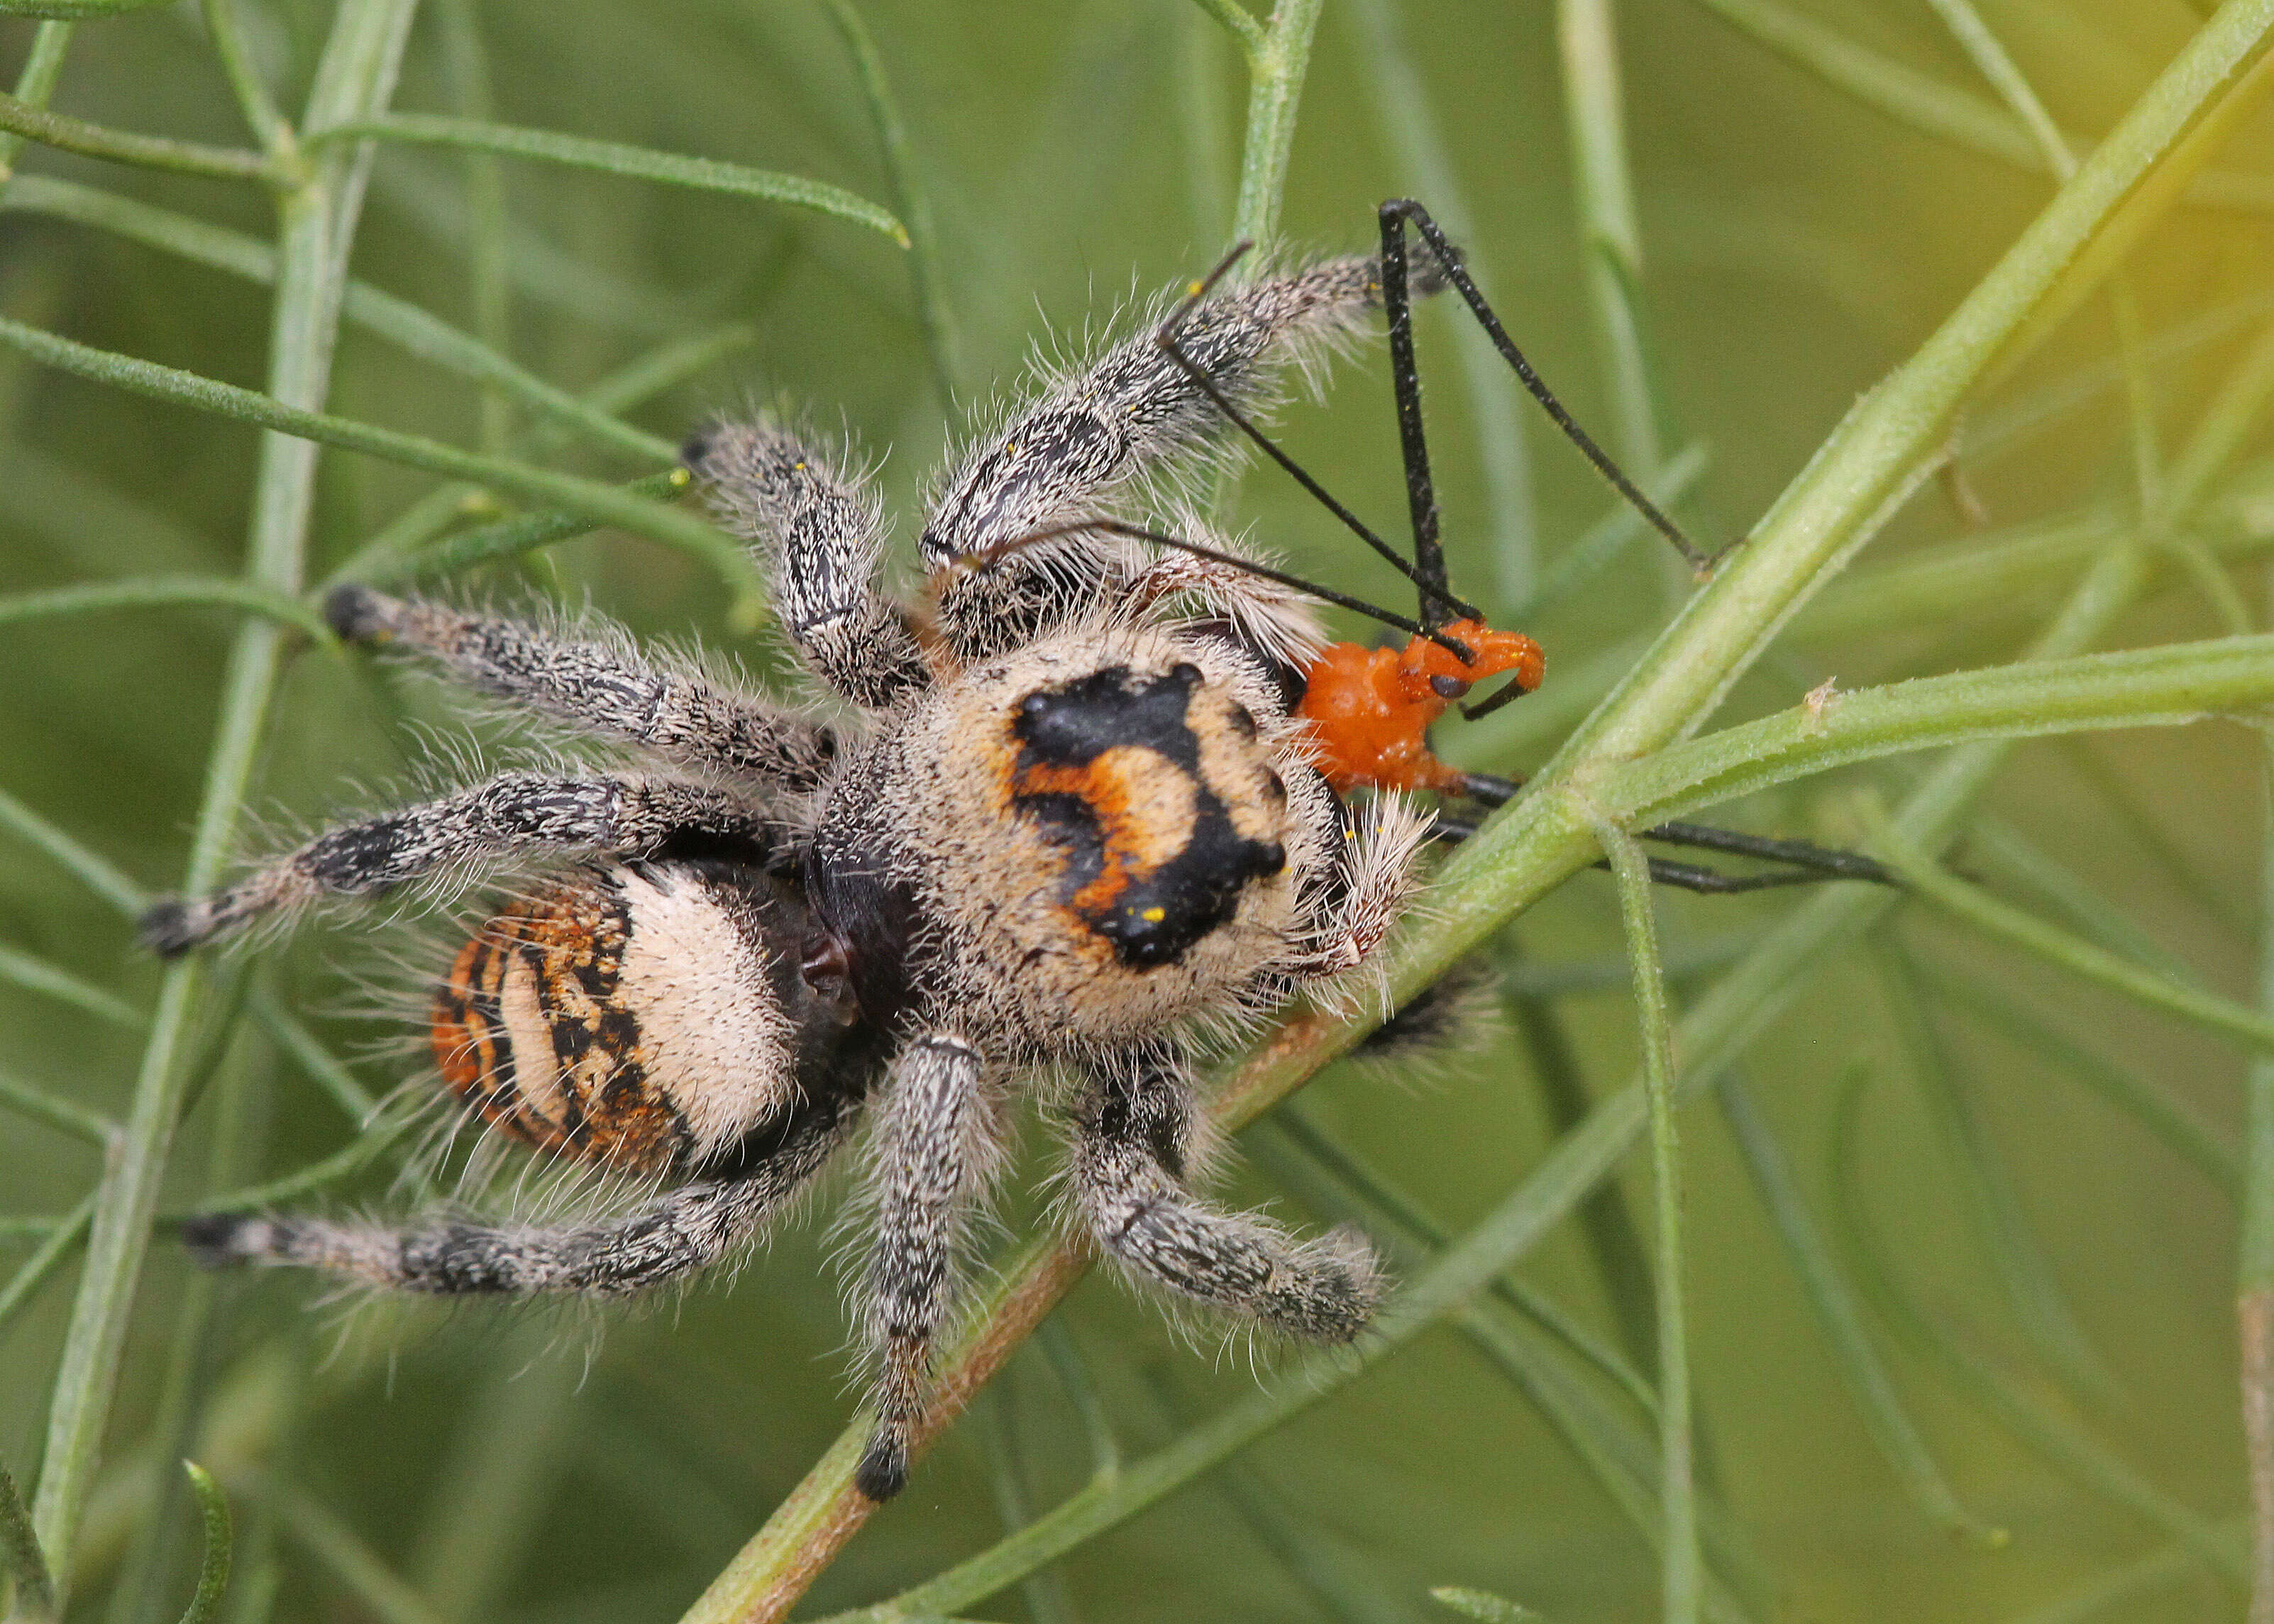 Image of Jumping Spiders